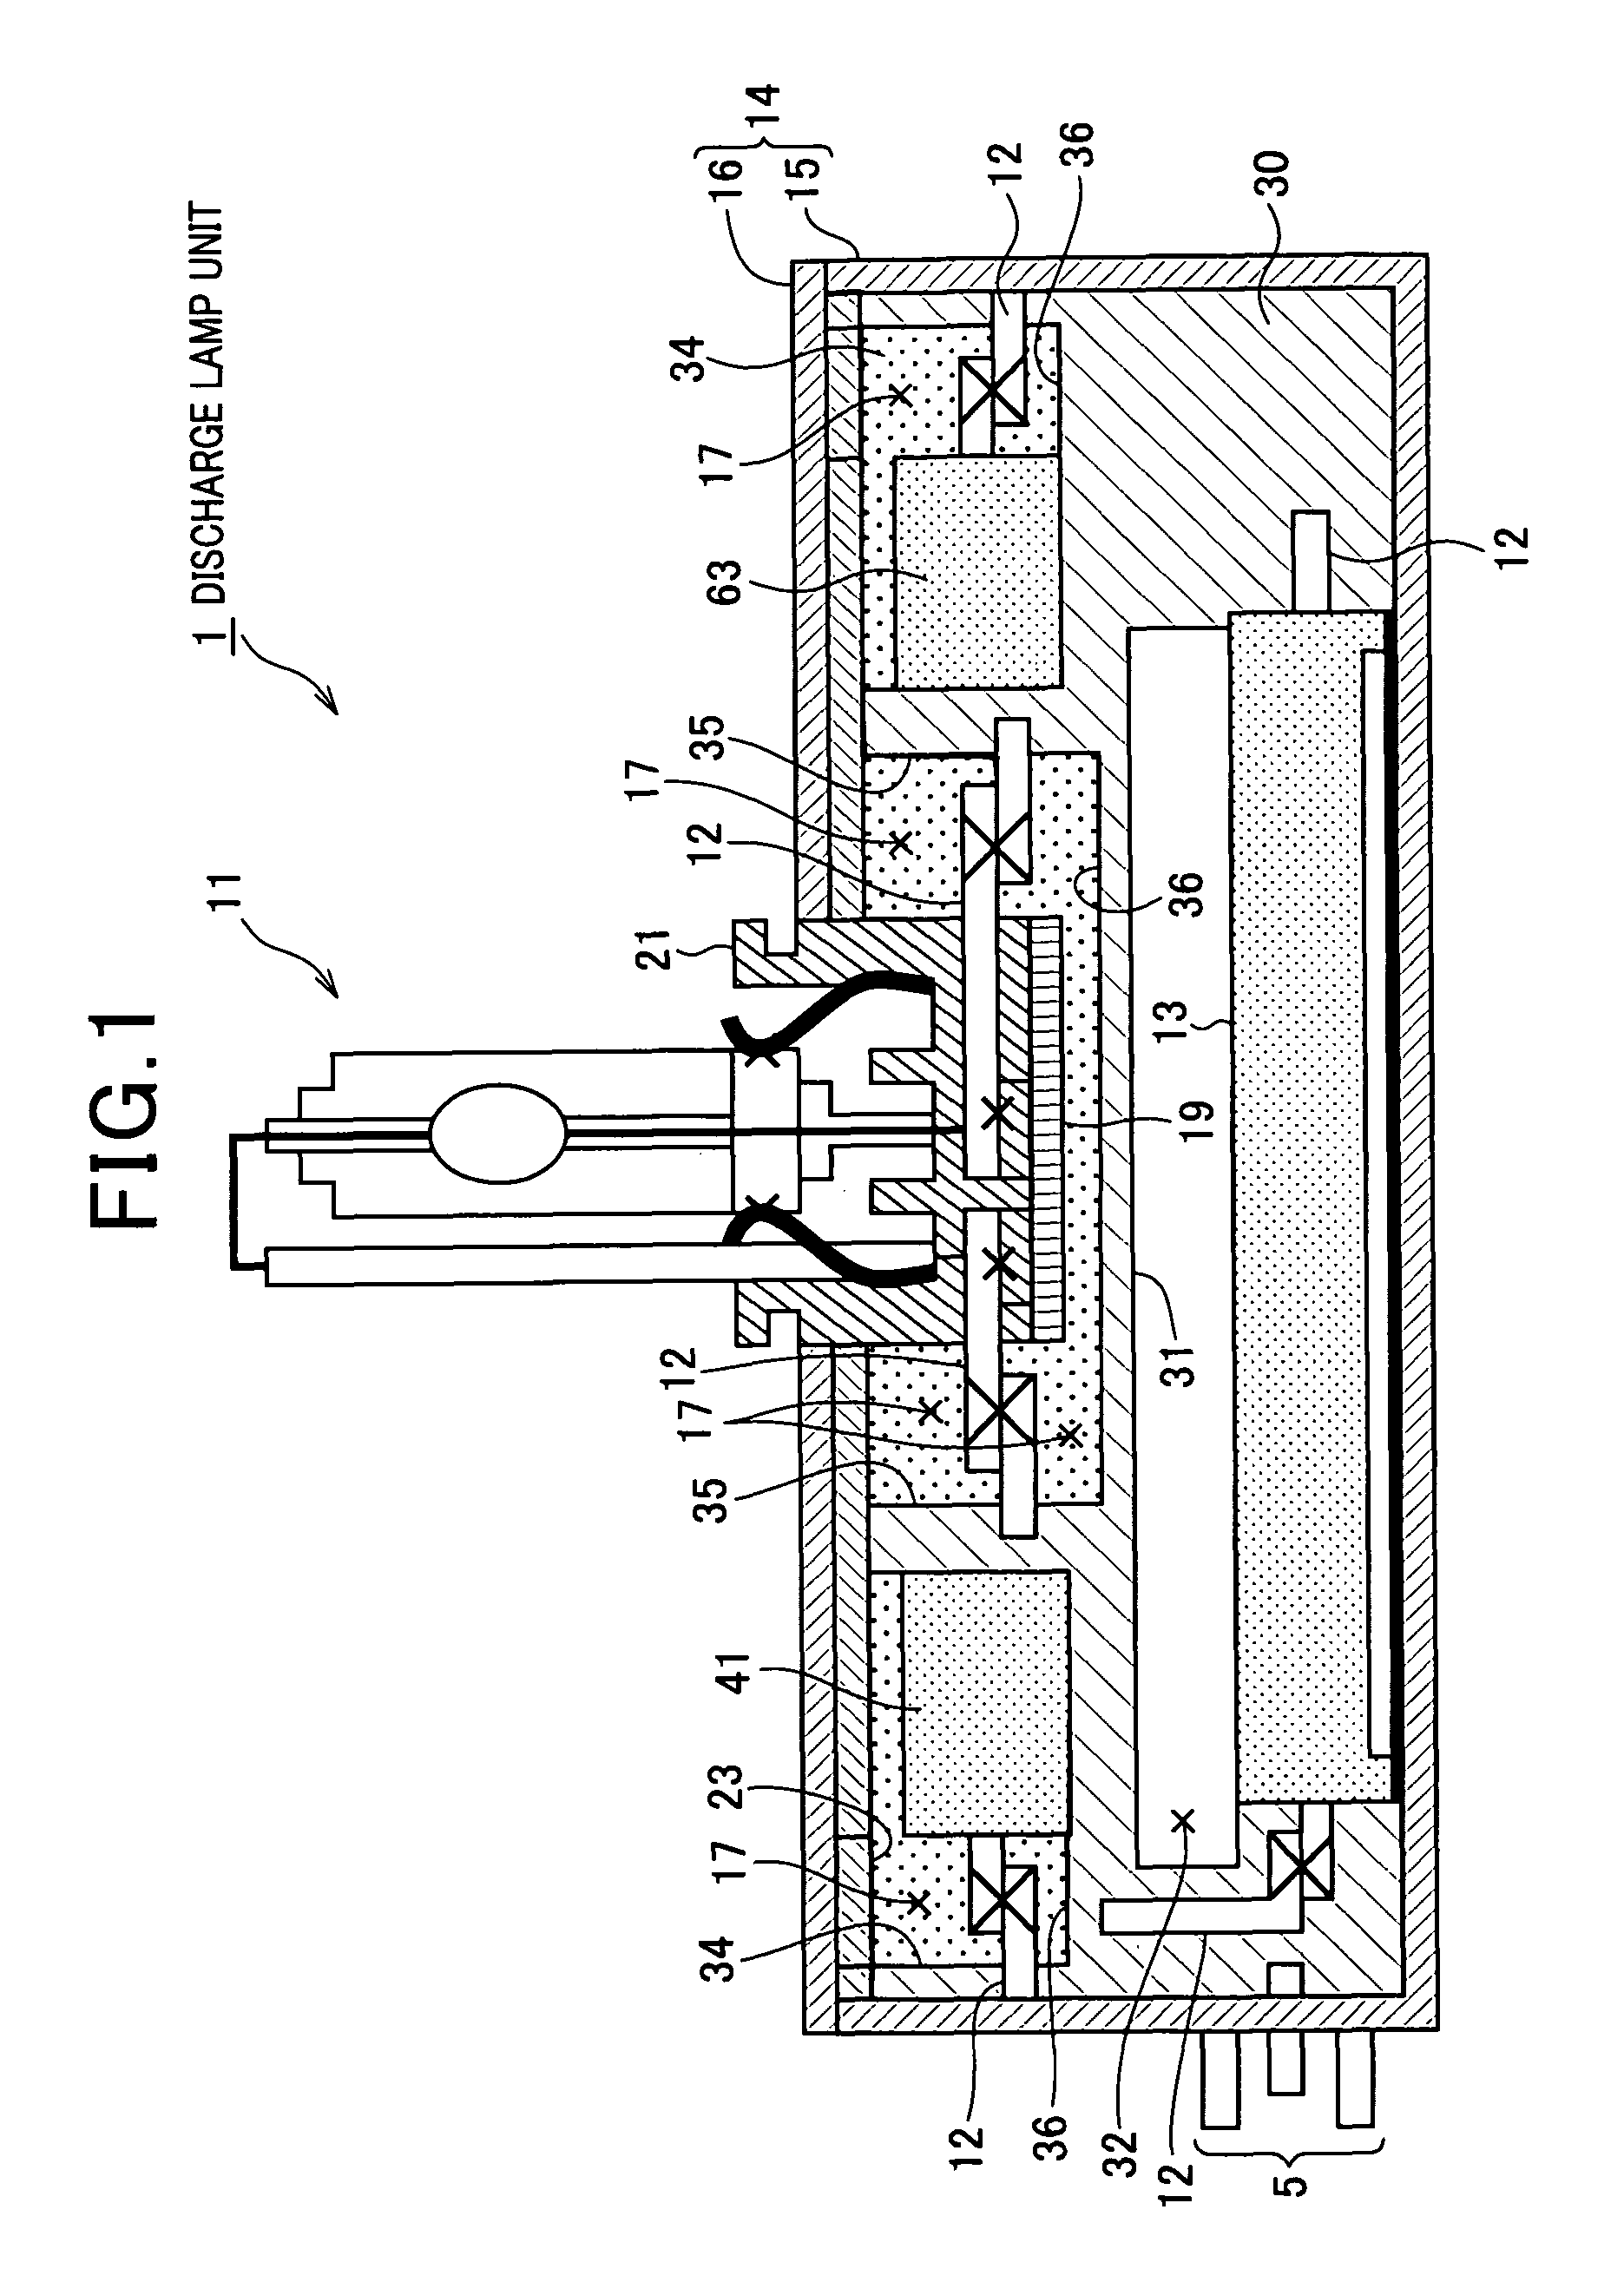 Discharge lamp unit with heat dissipation structure